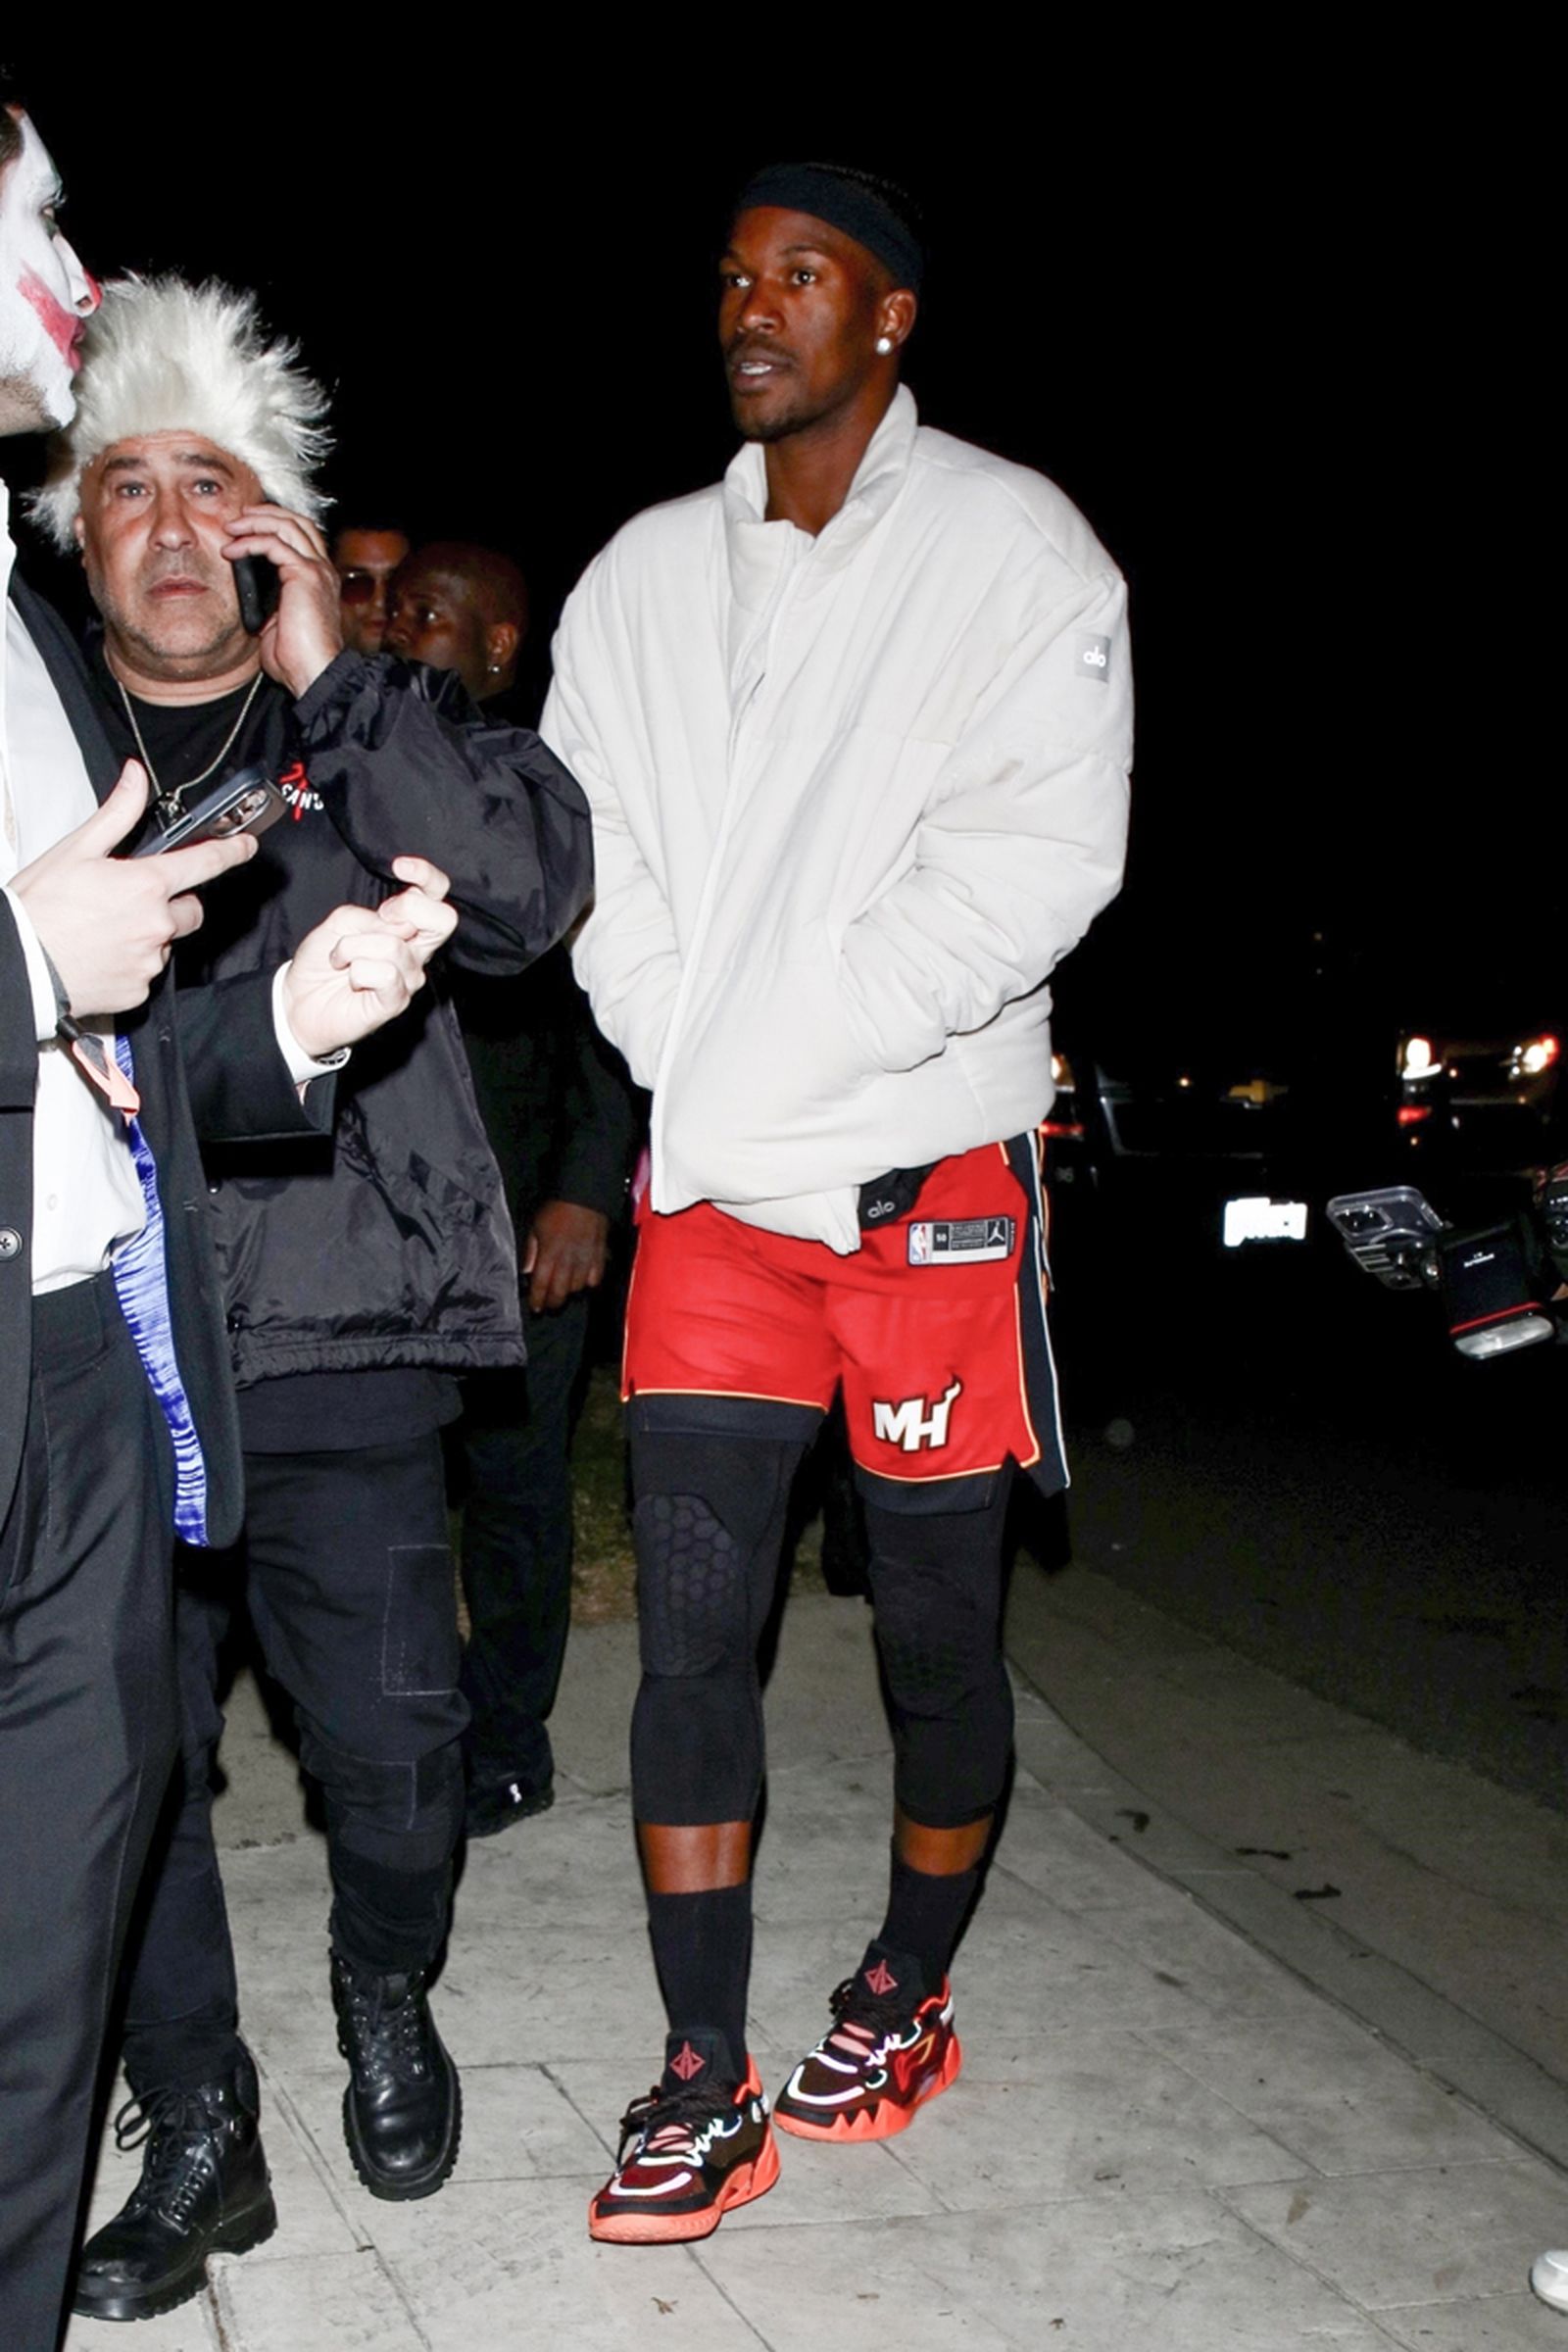 Professional basketball player Jimmy Butler attends a Halloween party dressed as himself